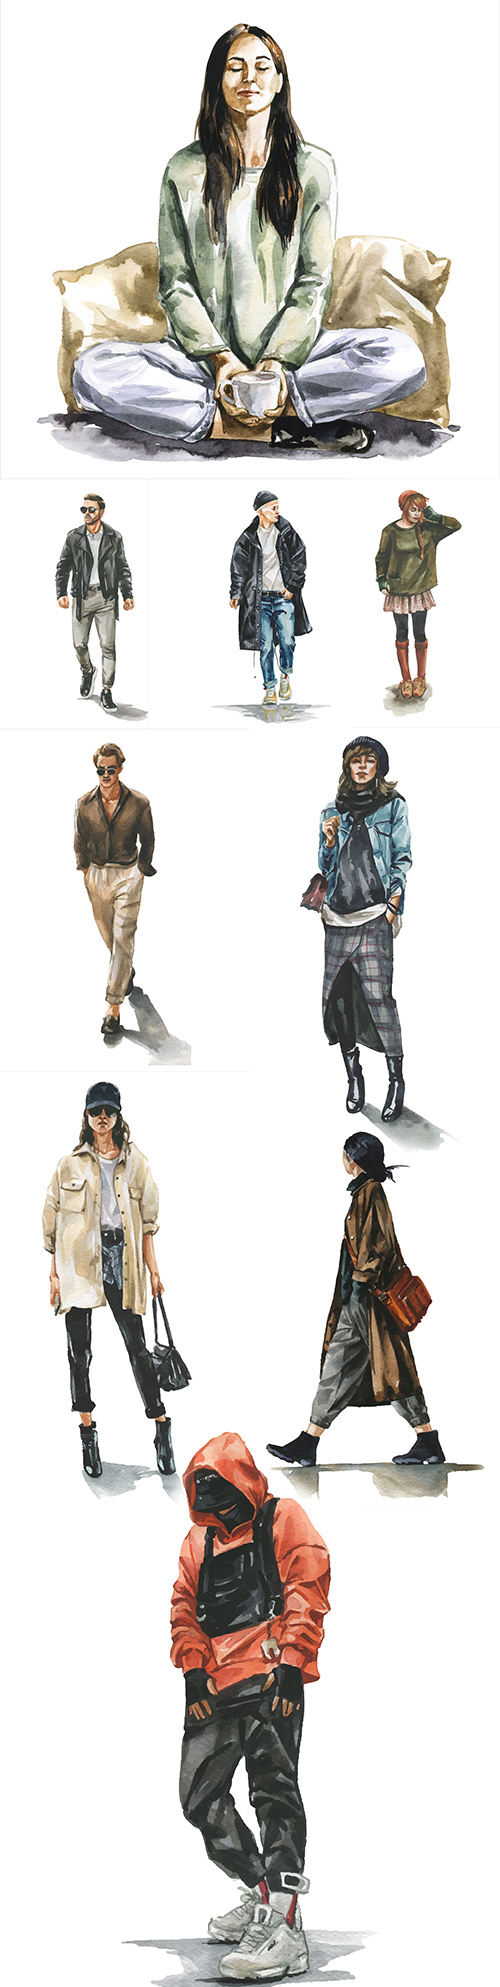 People in different clothes and poses watercolor illustrations
